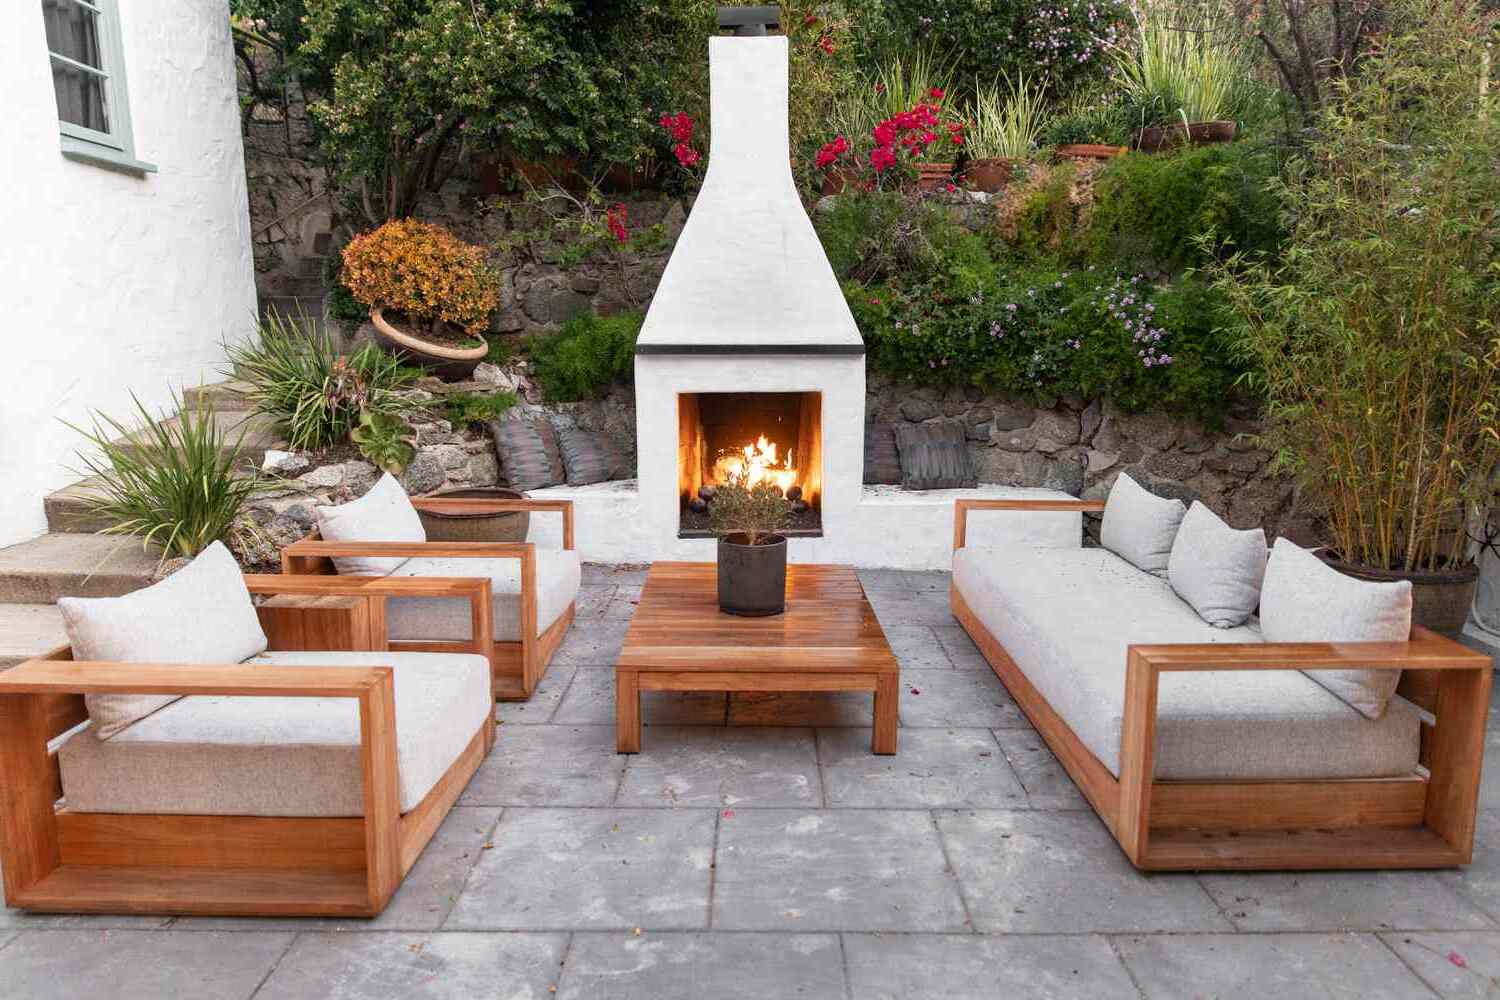 DIY Outdoor Fireplace: Step-by-Step Guide To Building Your Own